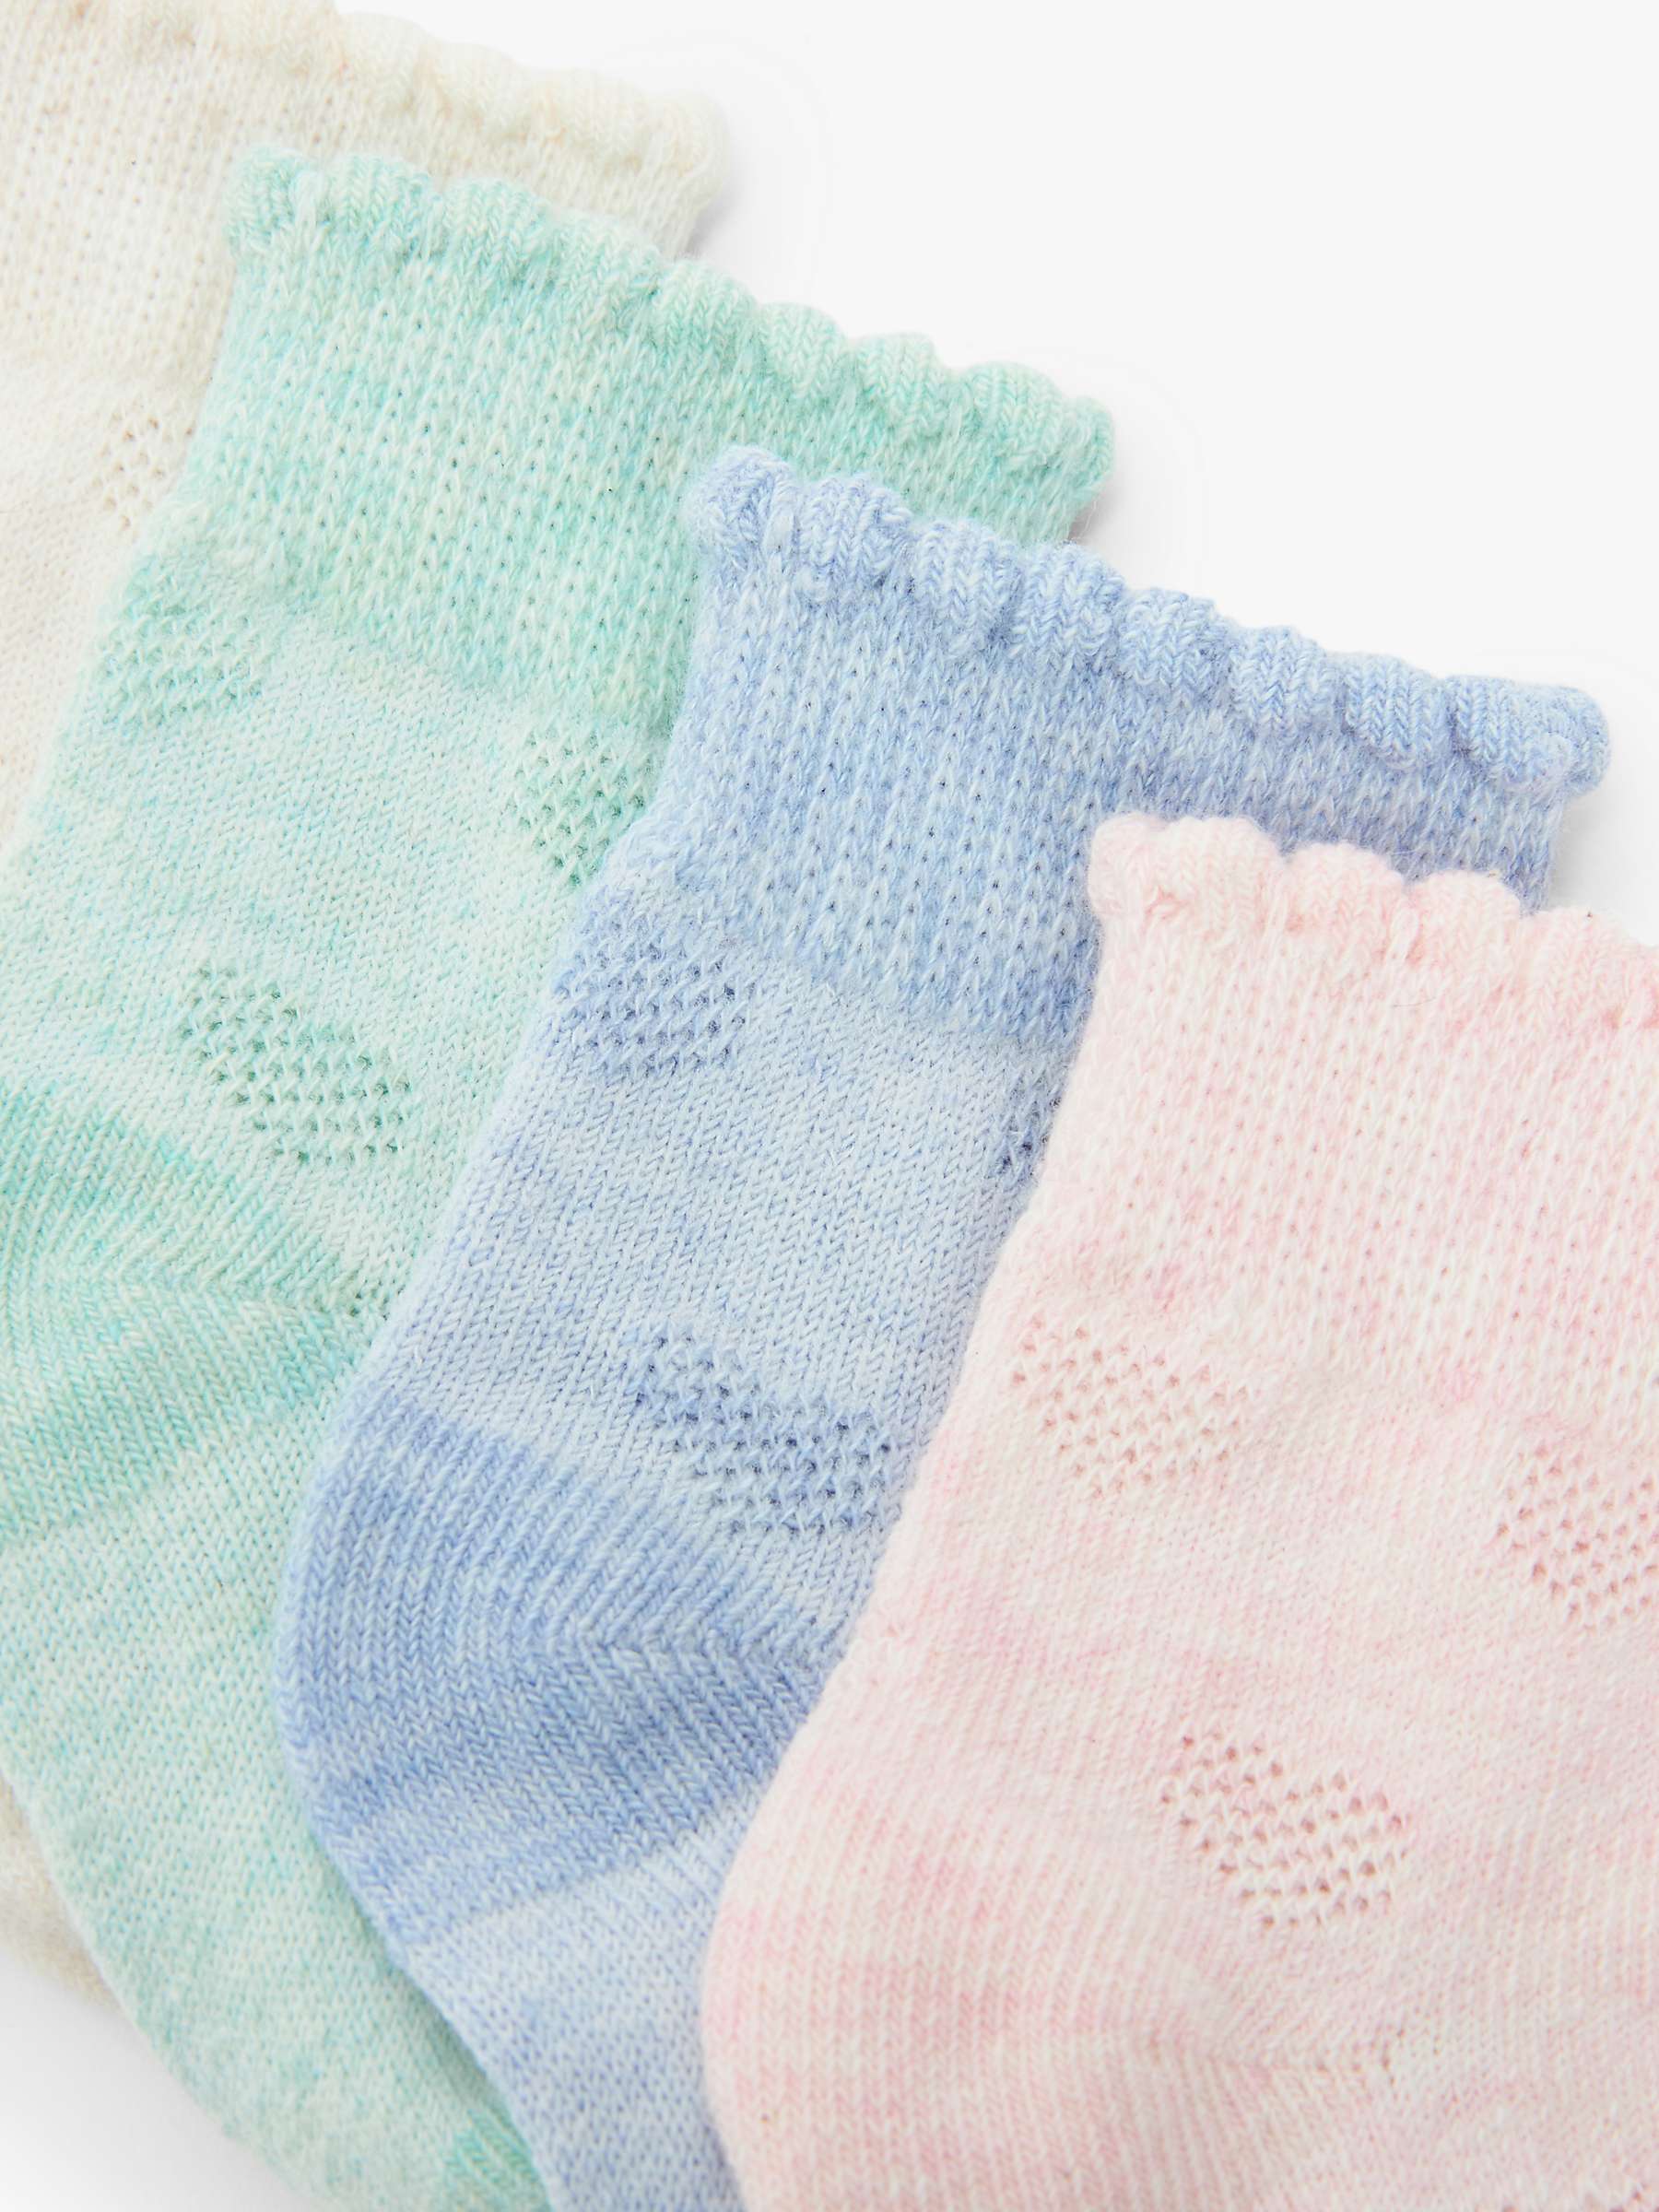 Buy John Lewis Baby Pretty Heart Embroidered Organic Cotton Blend Socks, Pack of 5, Multi Online at johnlewis.com